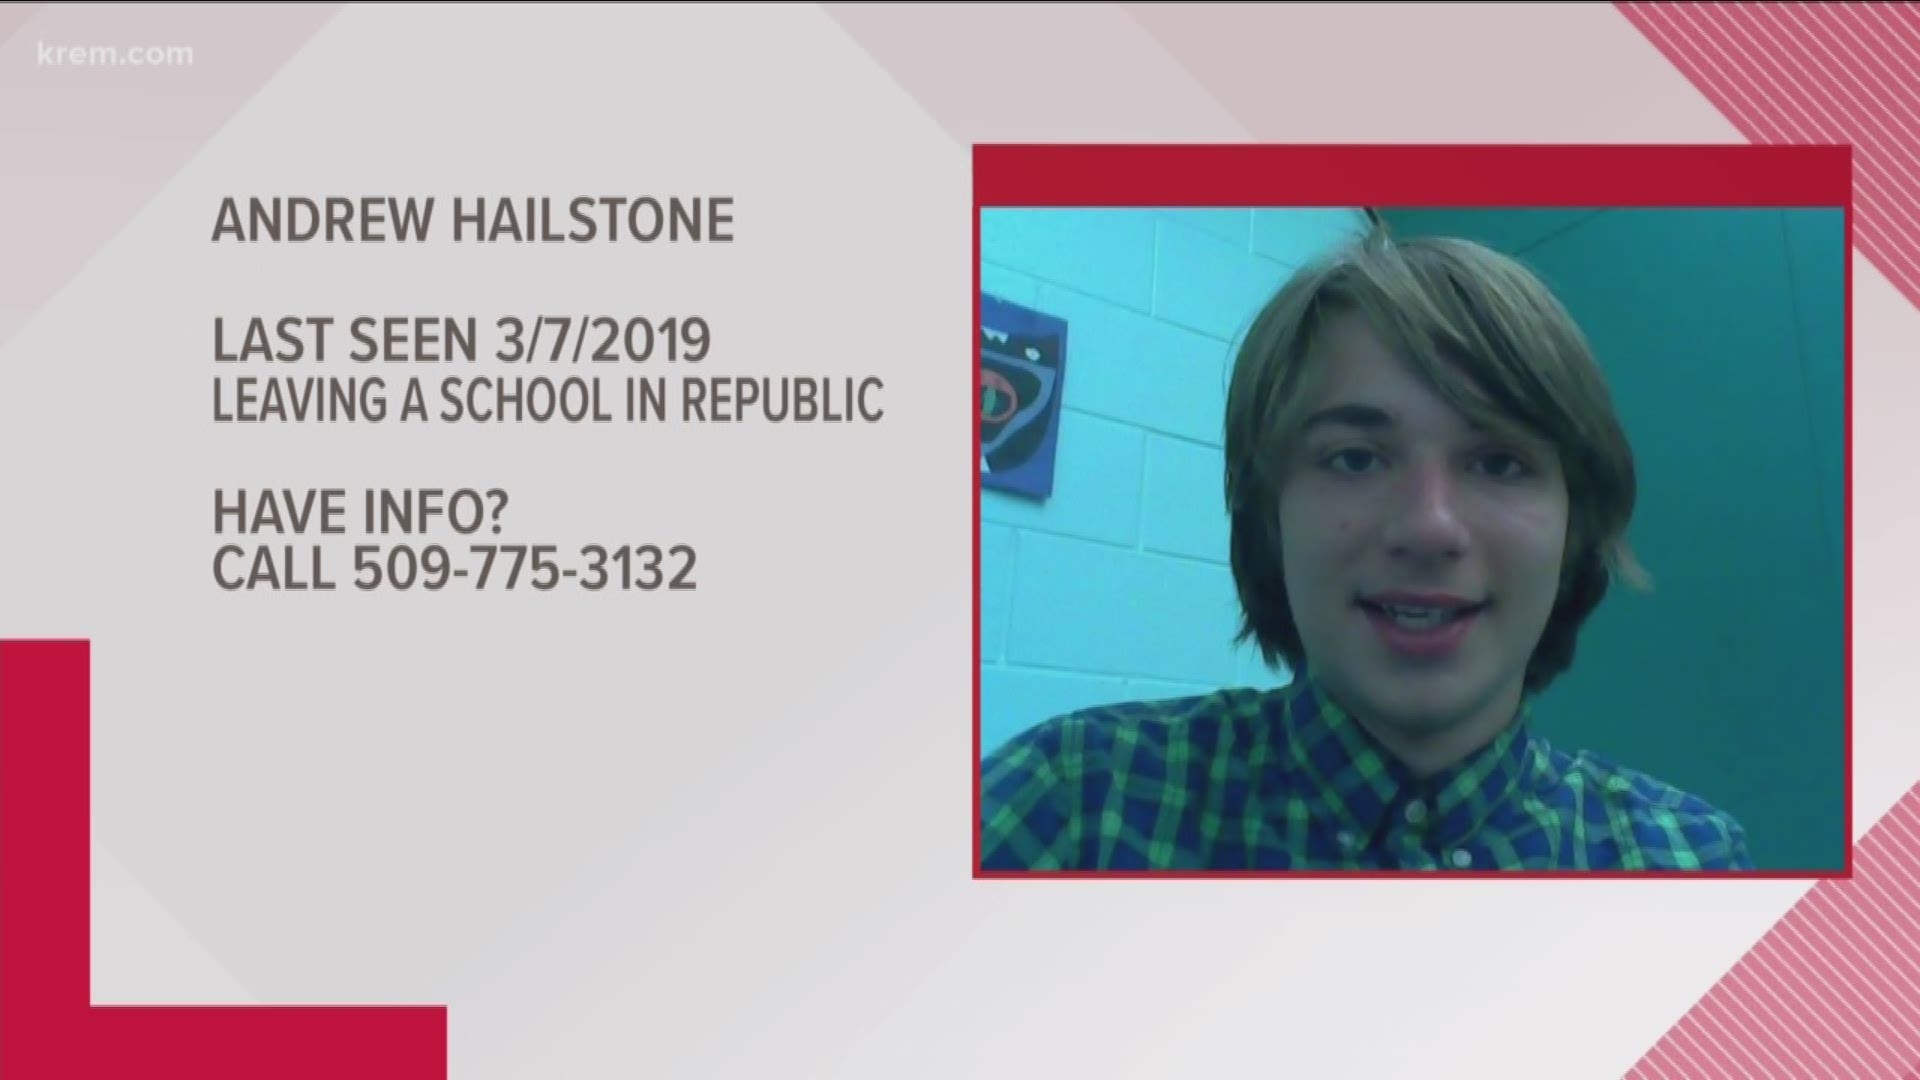 Andrew Hailstone was last seen at a Republic school on Thursday.